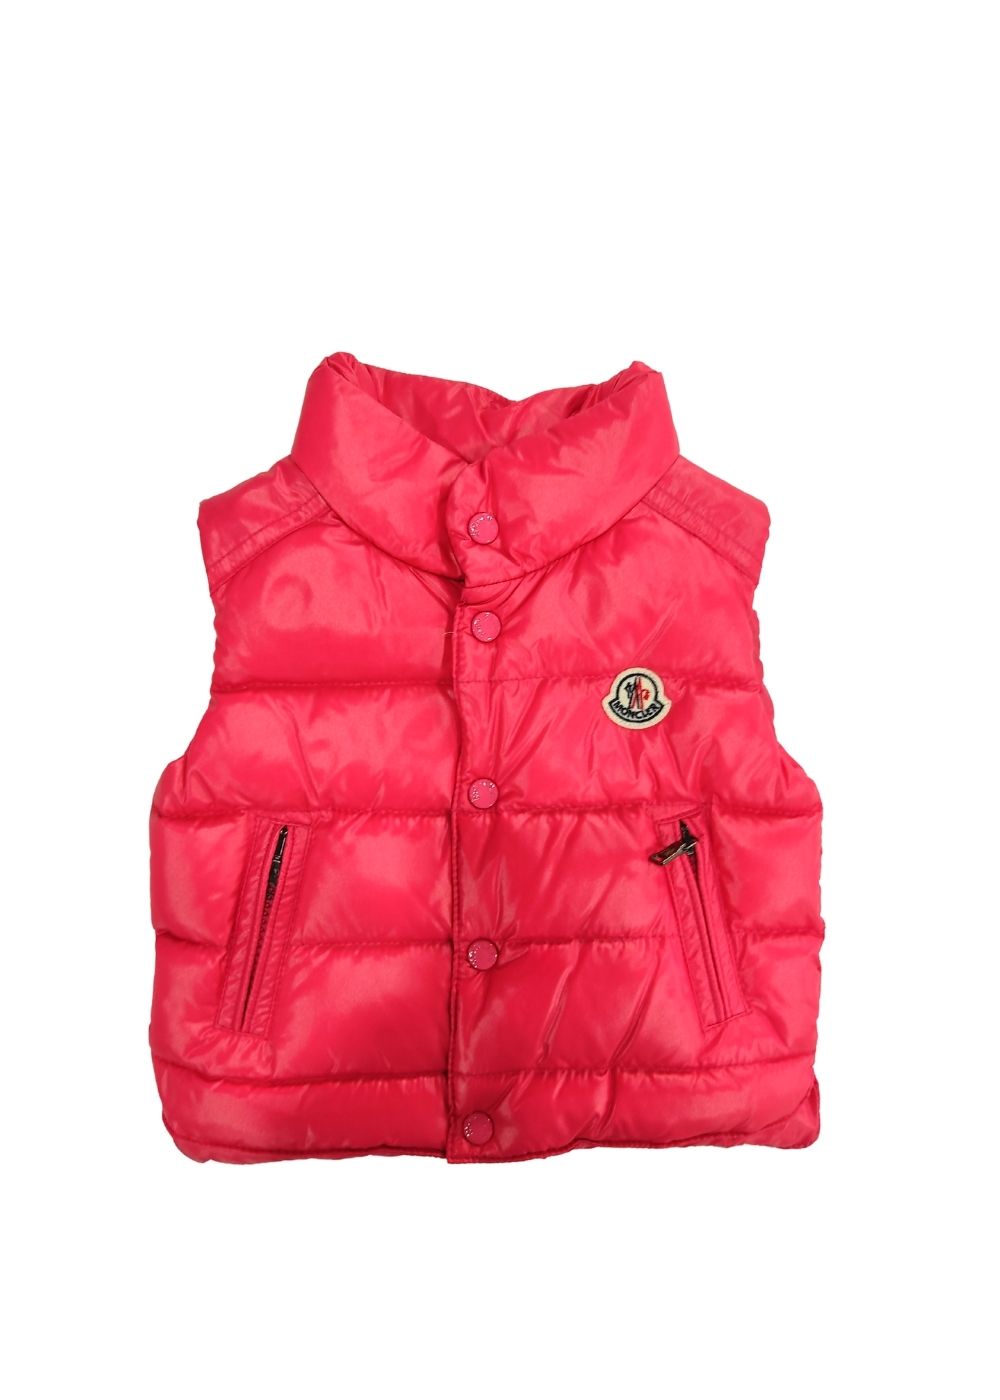 Featured image for “MONCLER GILET NEONATA”